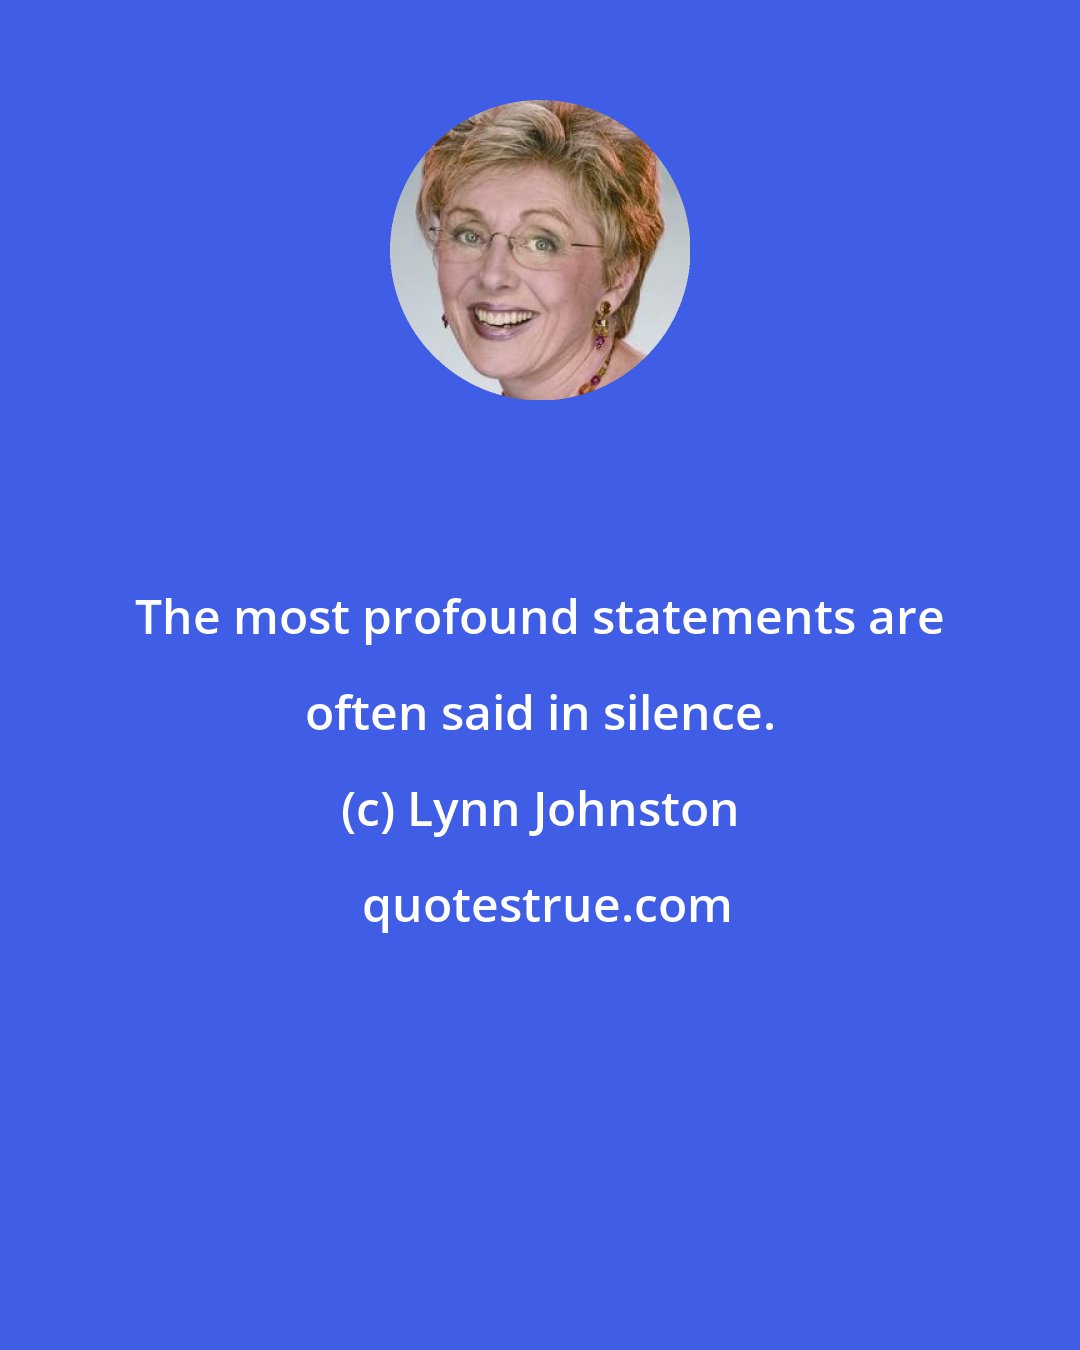 Lynn Johnston: The most profound statements are often said in silence.